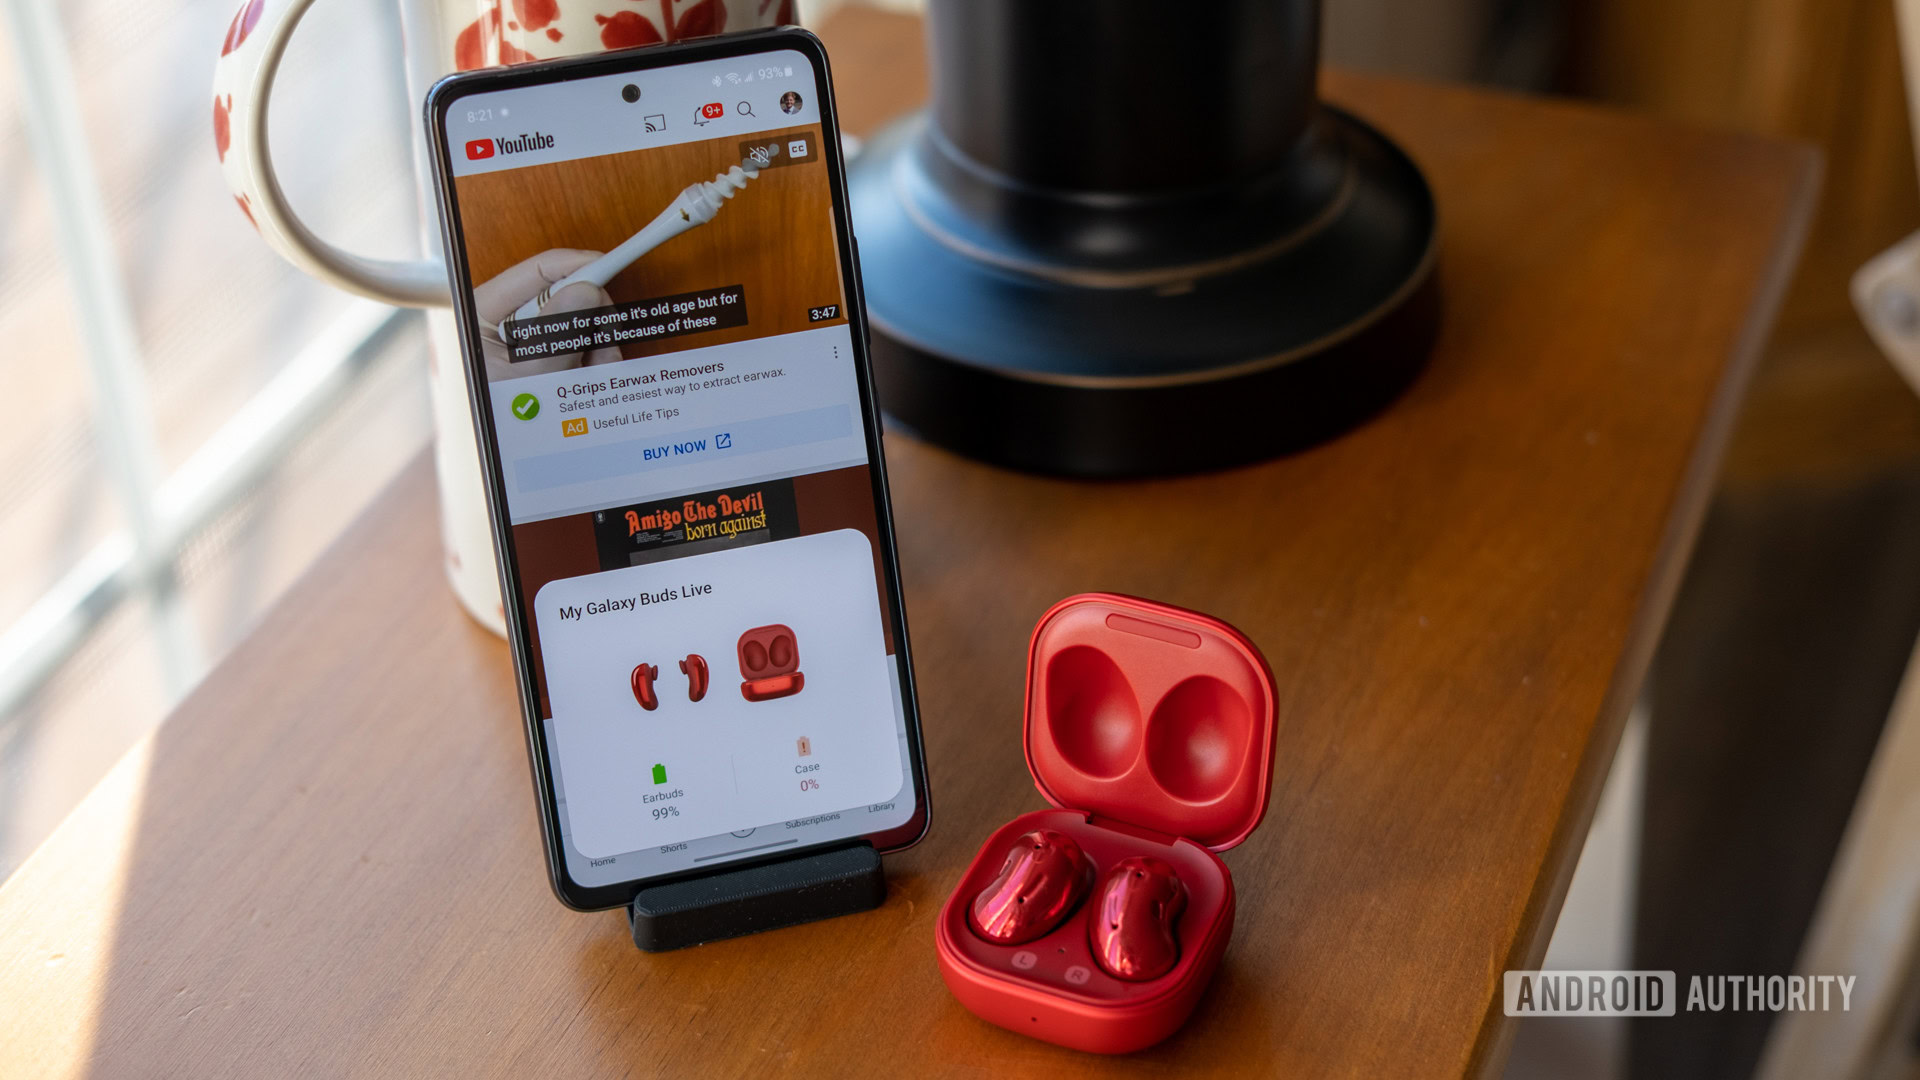 Samsung Galaxy A53 standing upright in a dock showing YouTube on the display, with a pair of red Galaxy Buds in a case next to it.